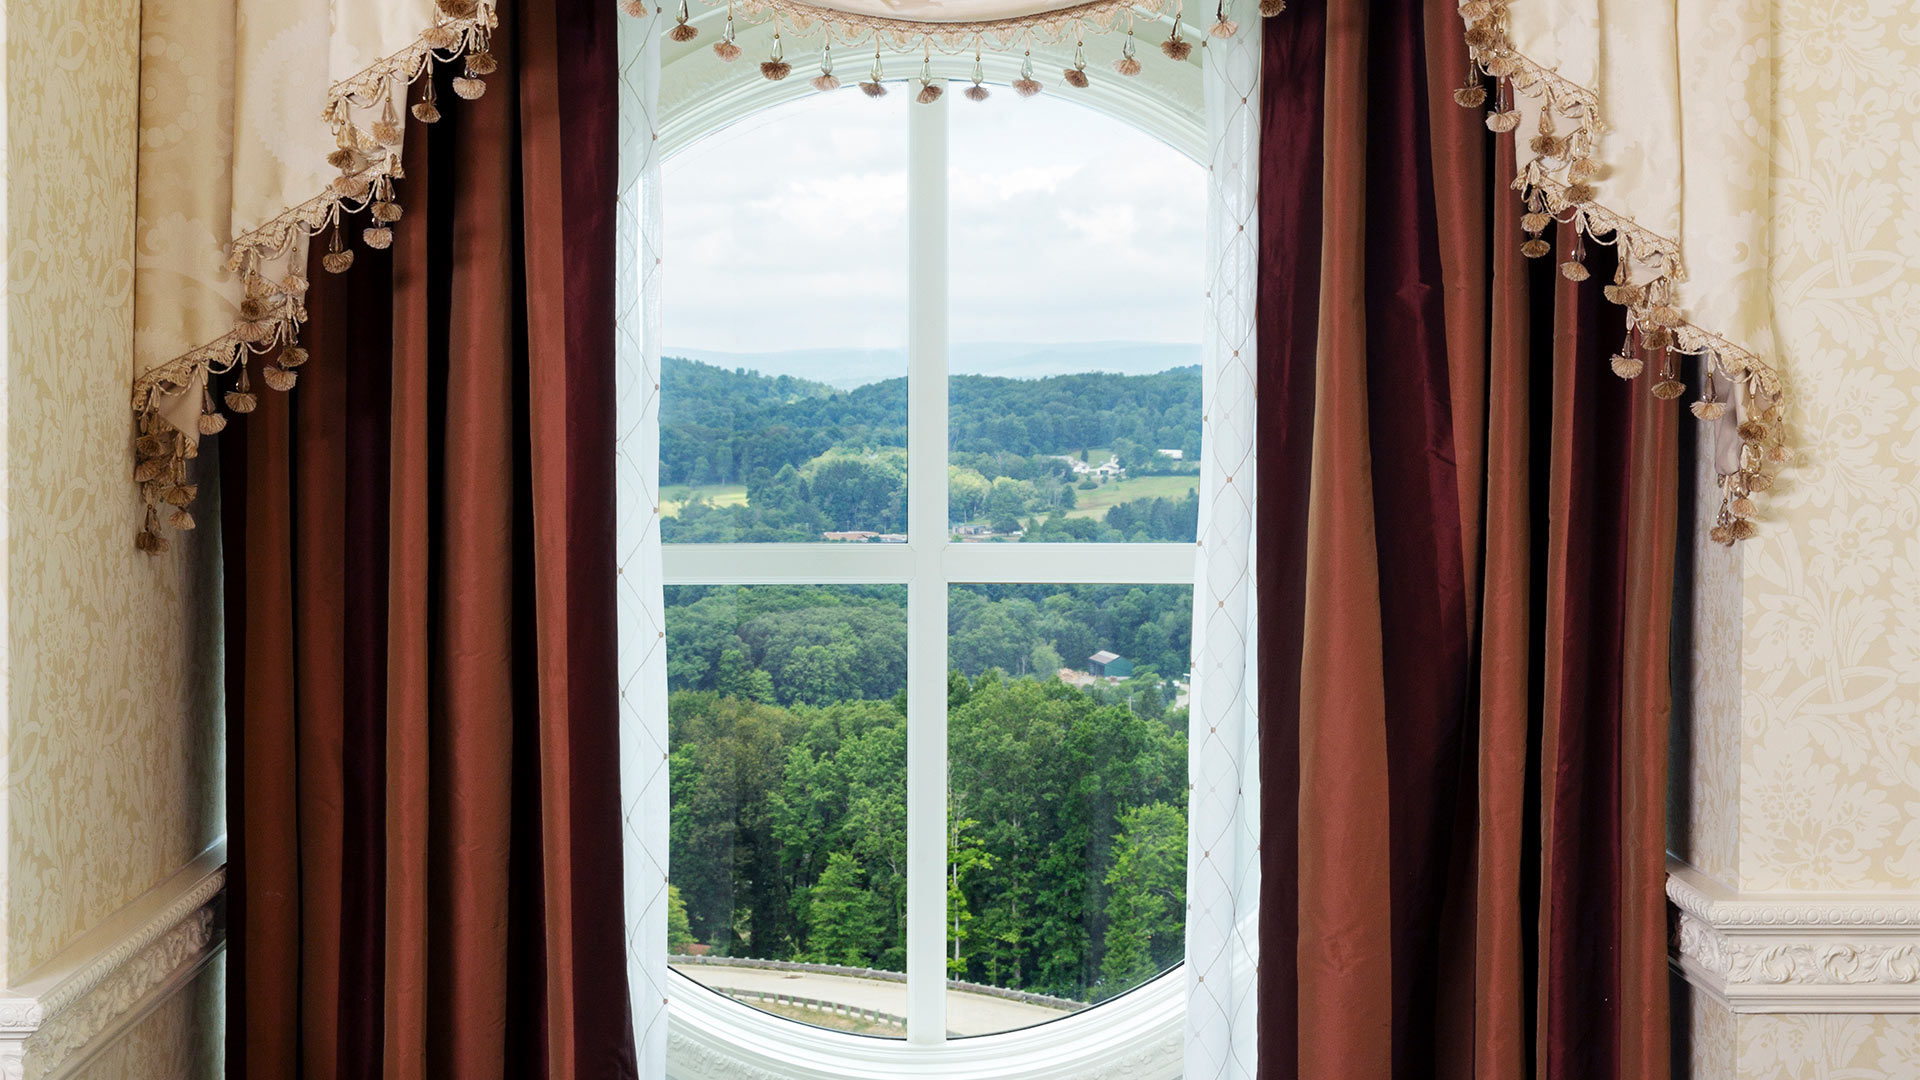 large window overlooking the resort grounds. beautiful red and white curtains frame the window